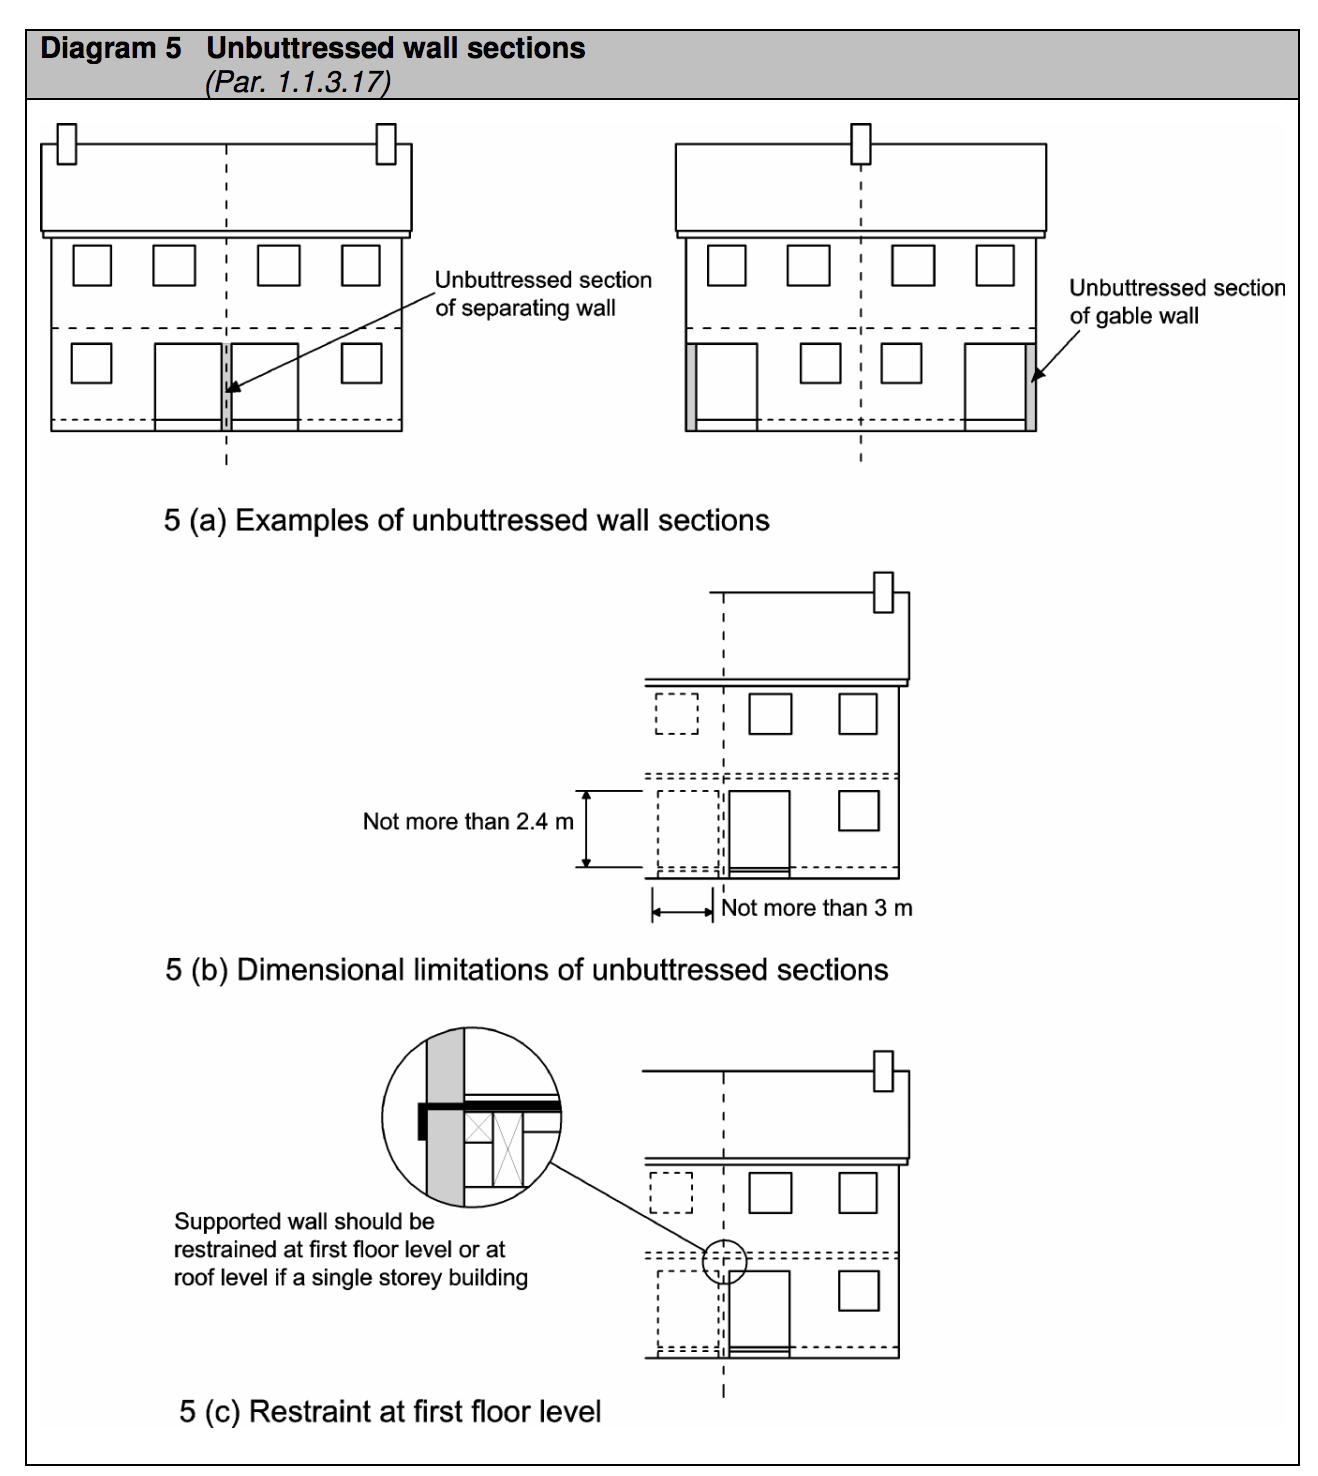 Diagram HA5  - Unbuttressed wall sections - Extract from TGD A